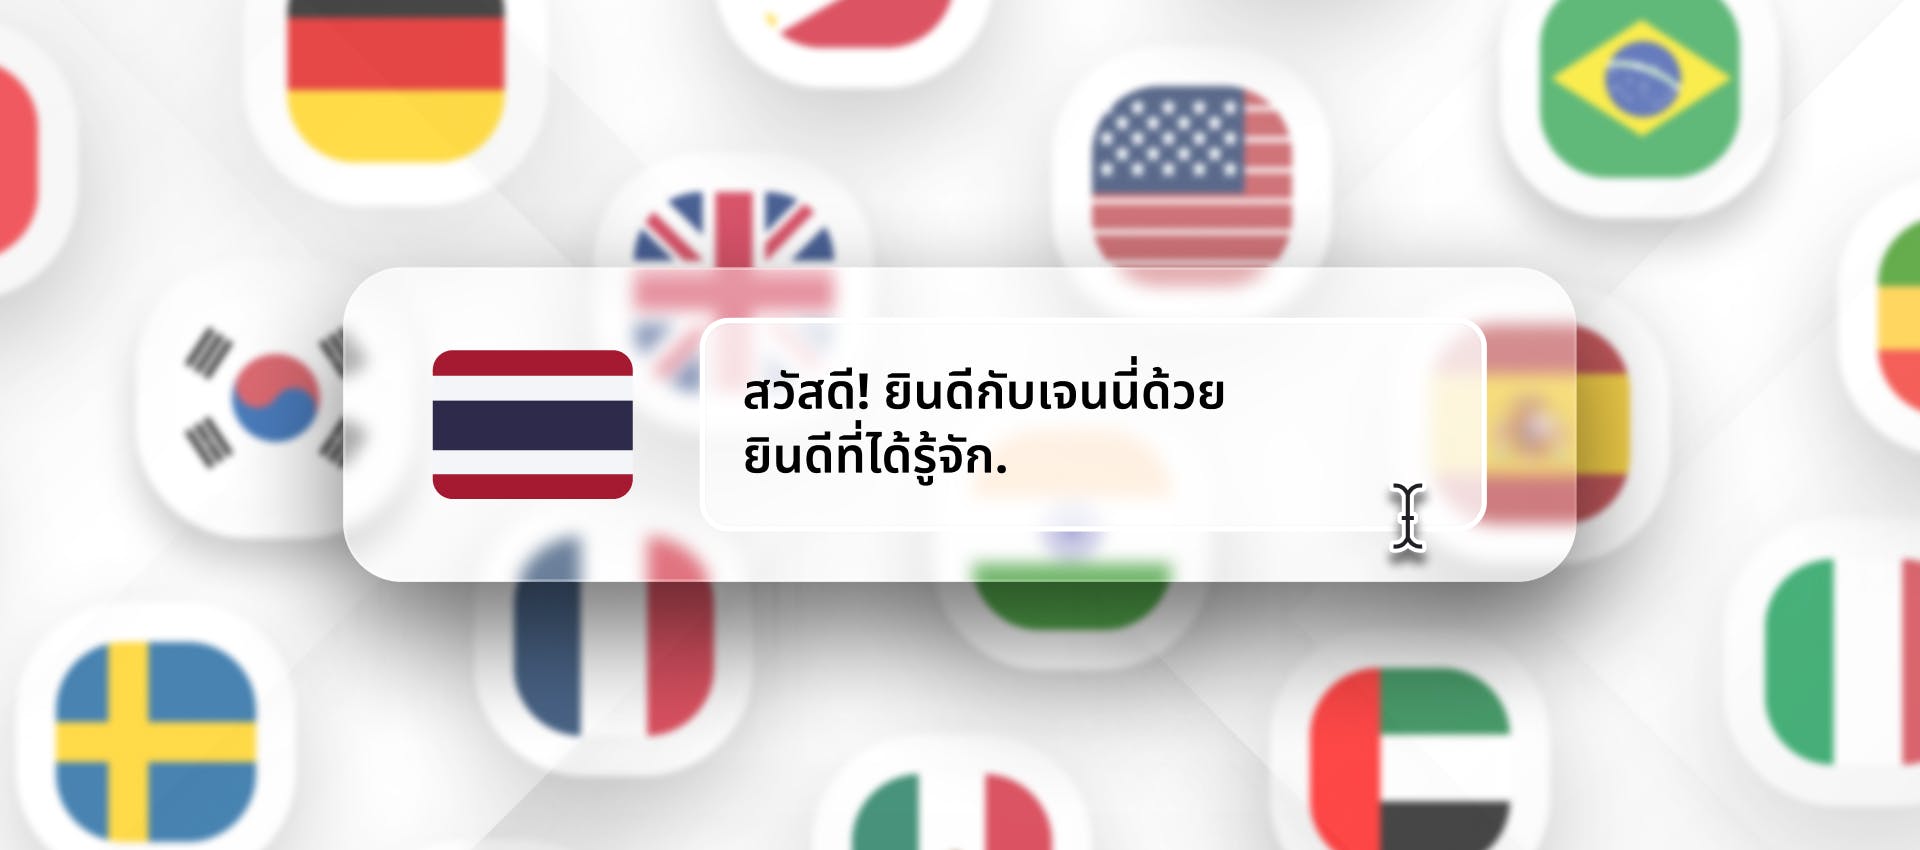 Thai phrase for Thai TTS generation with different flags in the background